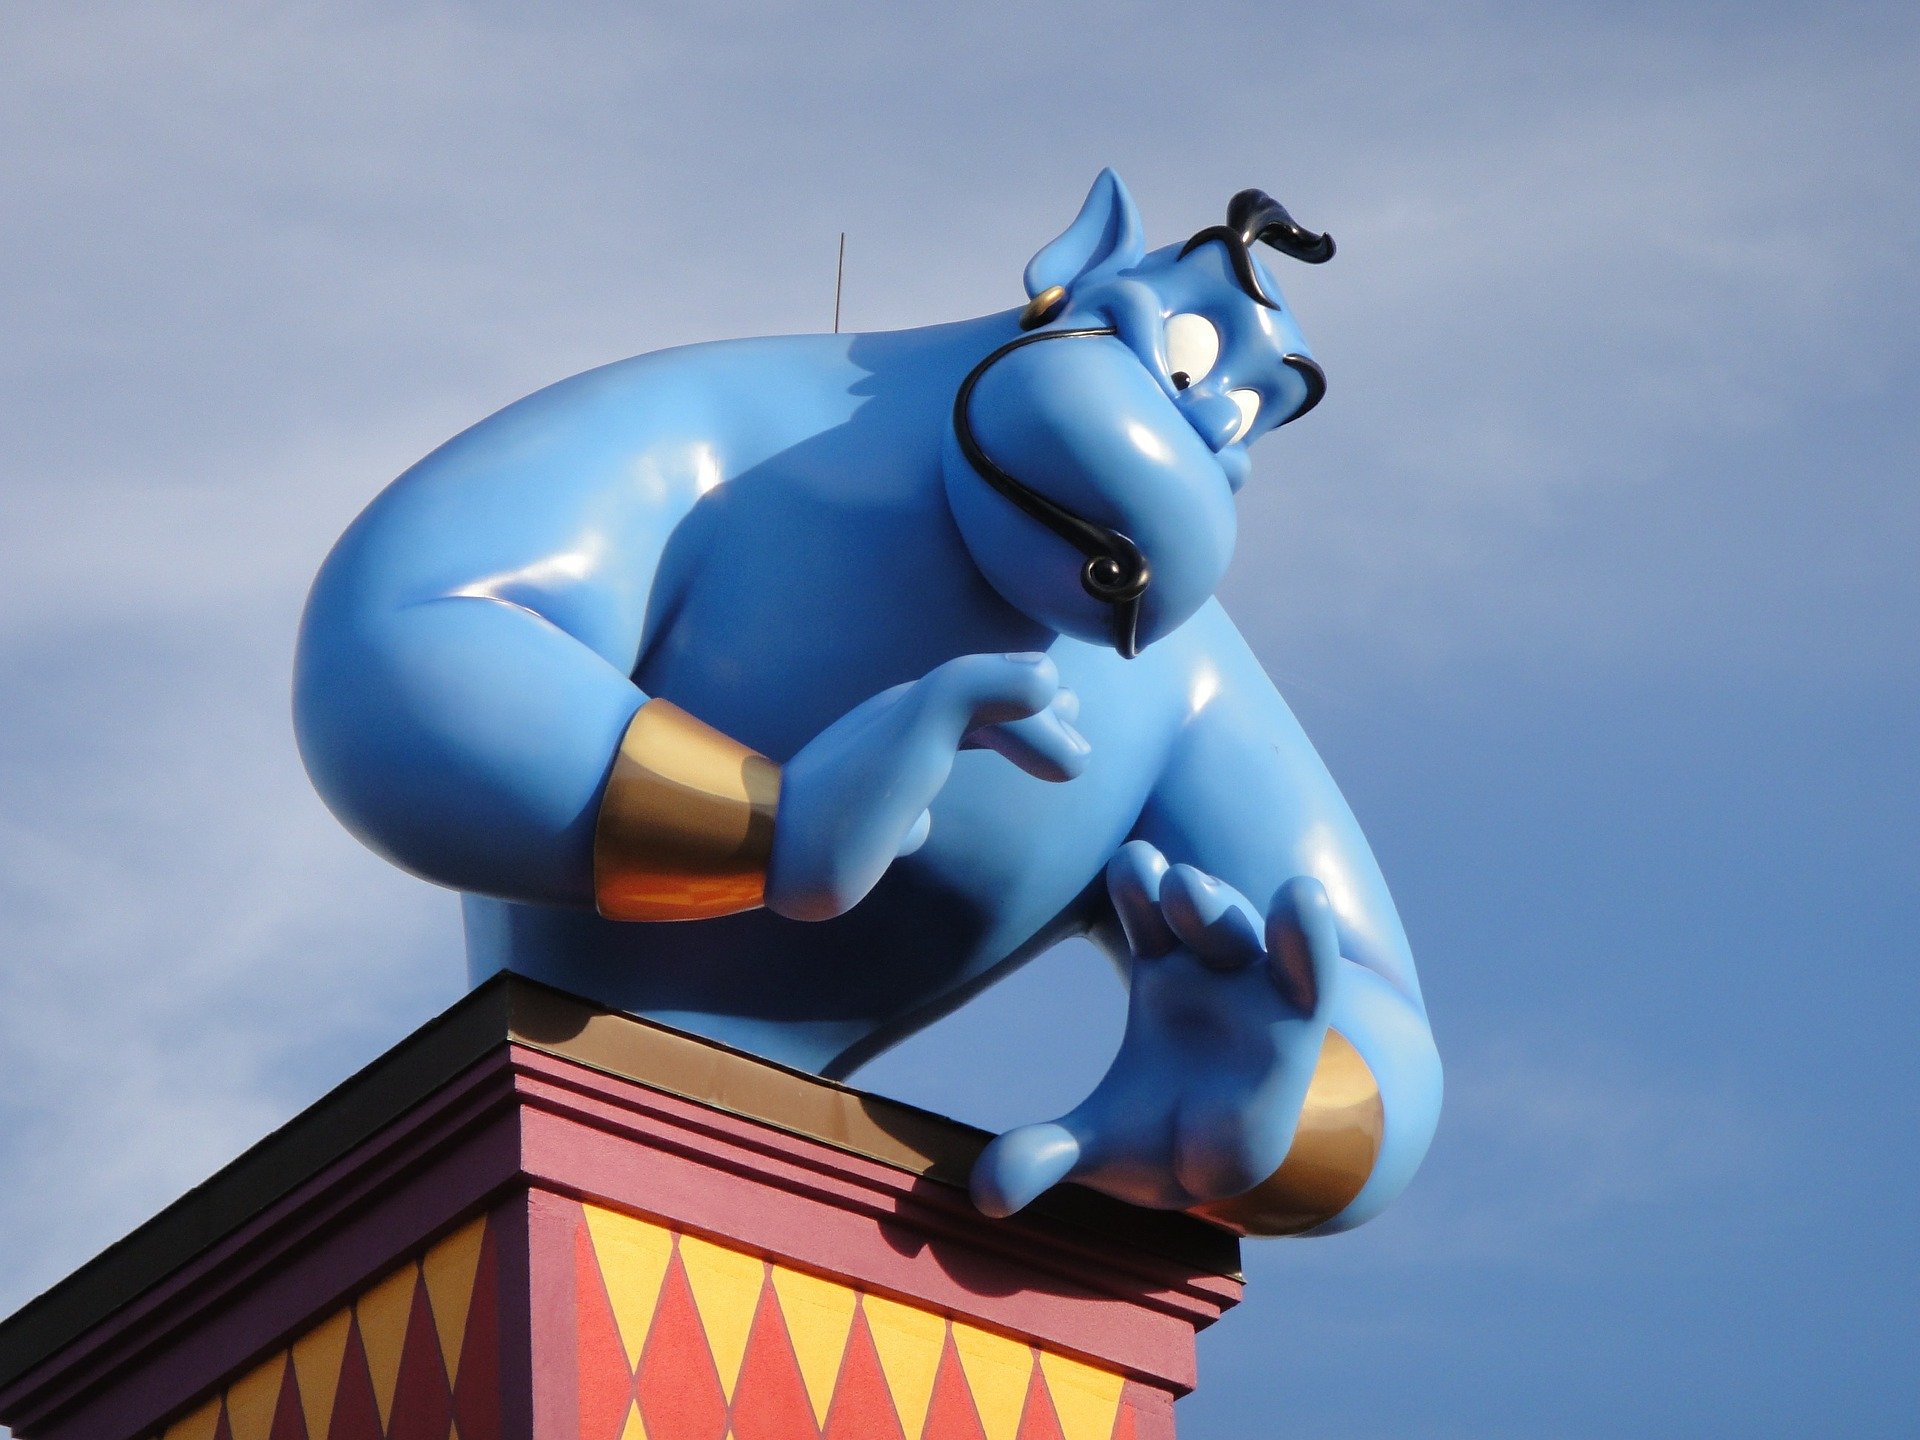 Pictured - A cartoon character of a genie | Source: Pixabay 